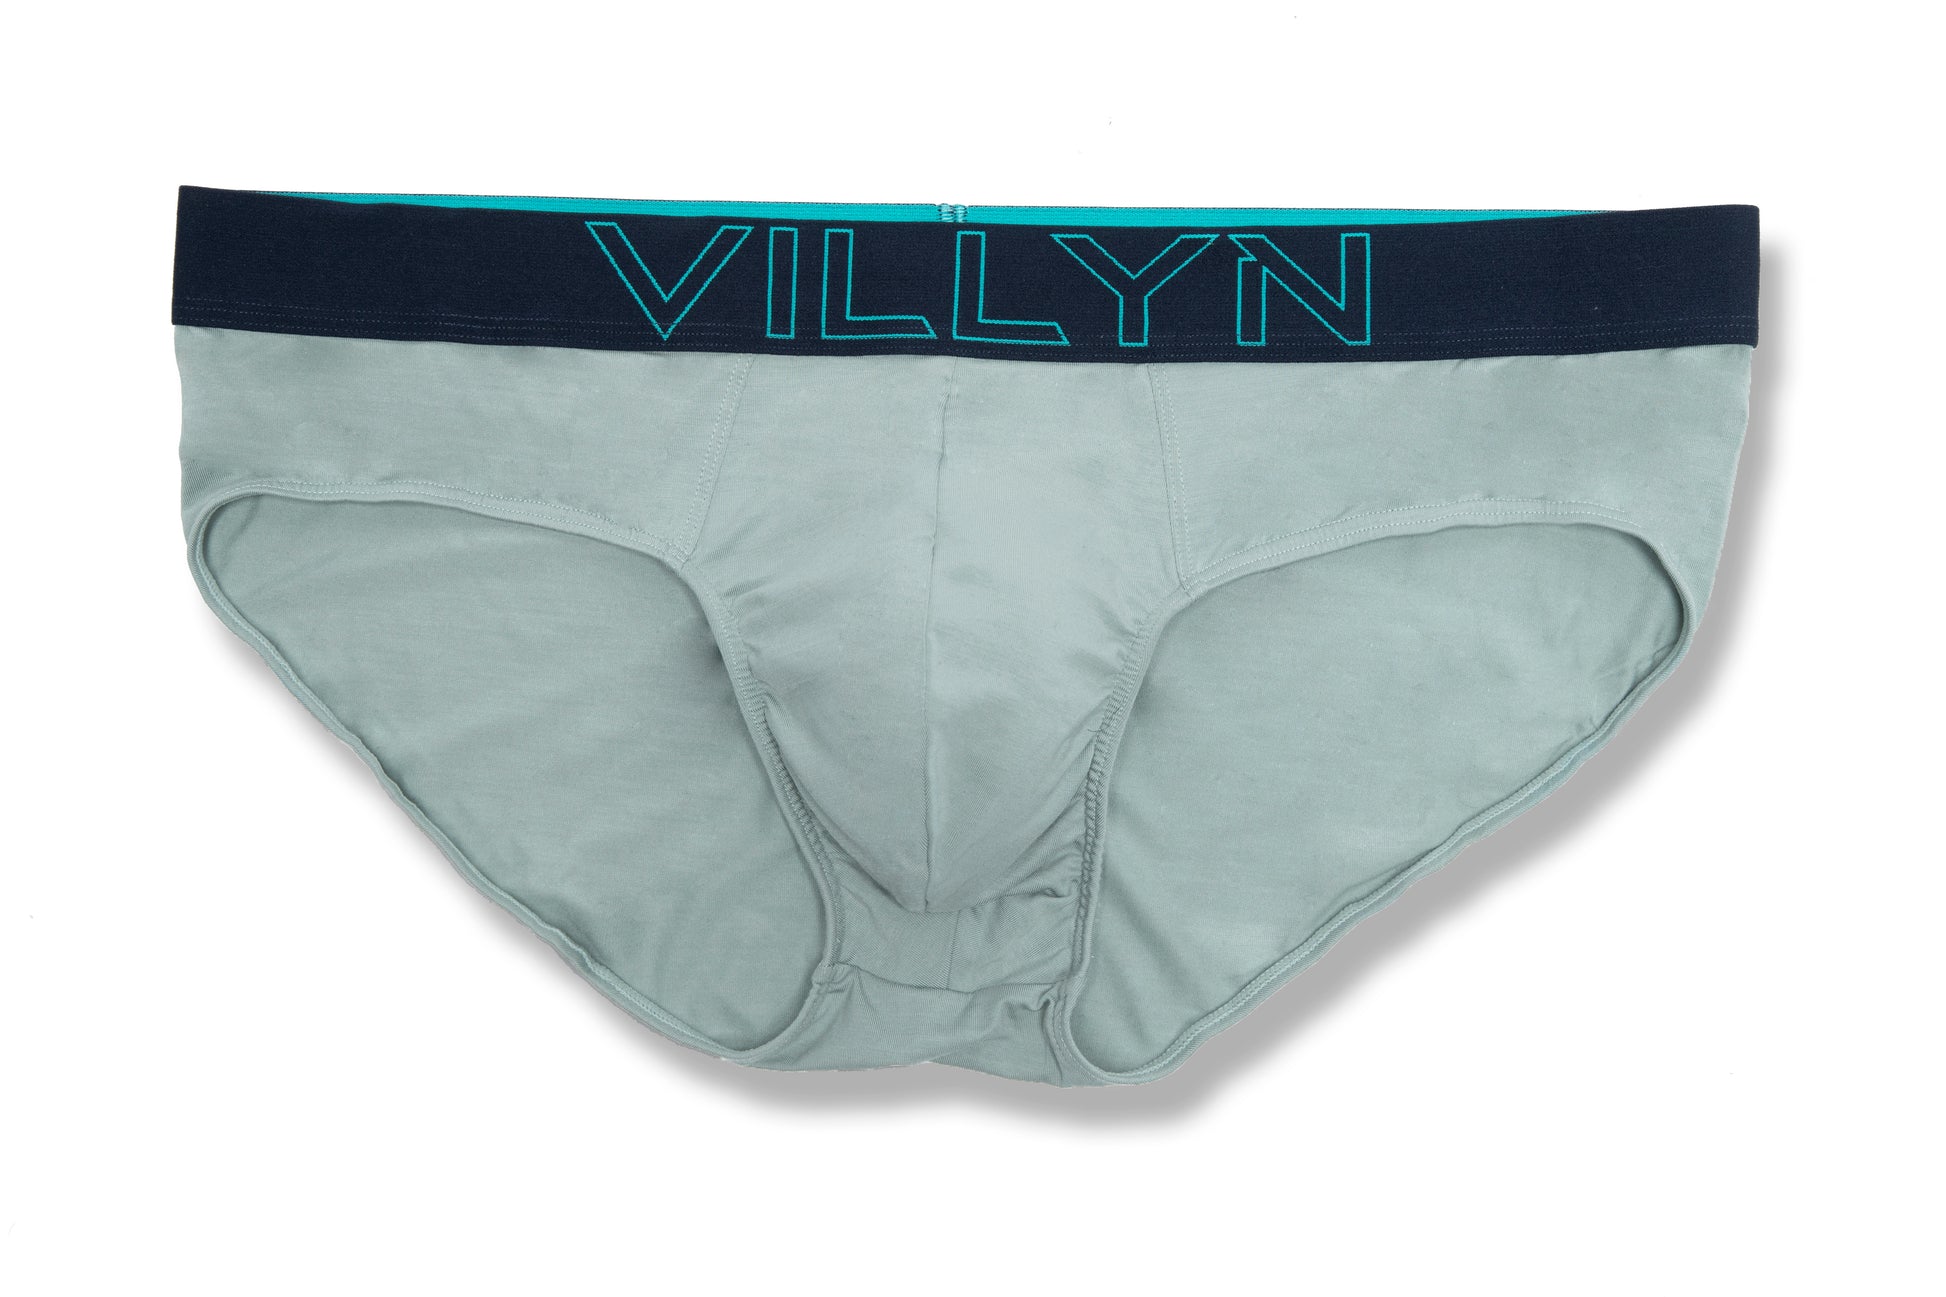 Wholesale VILLYN Origin Boxer-Brief Black Modal by VILLYN for your